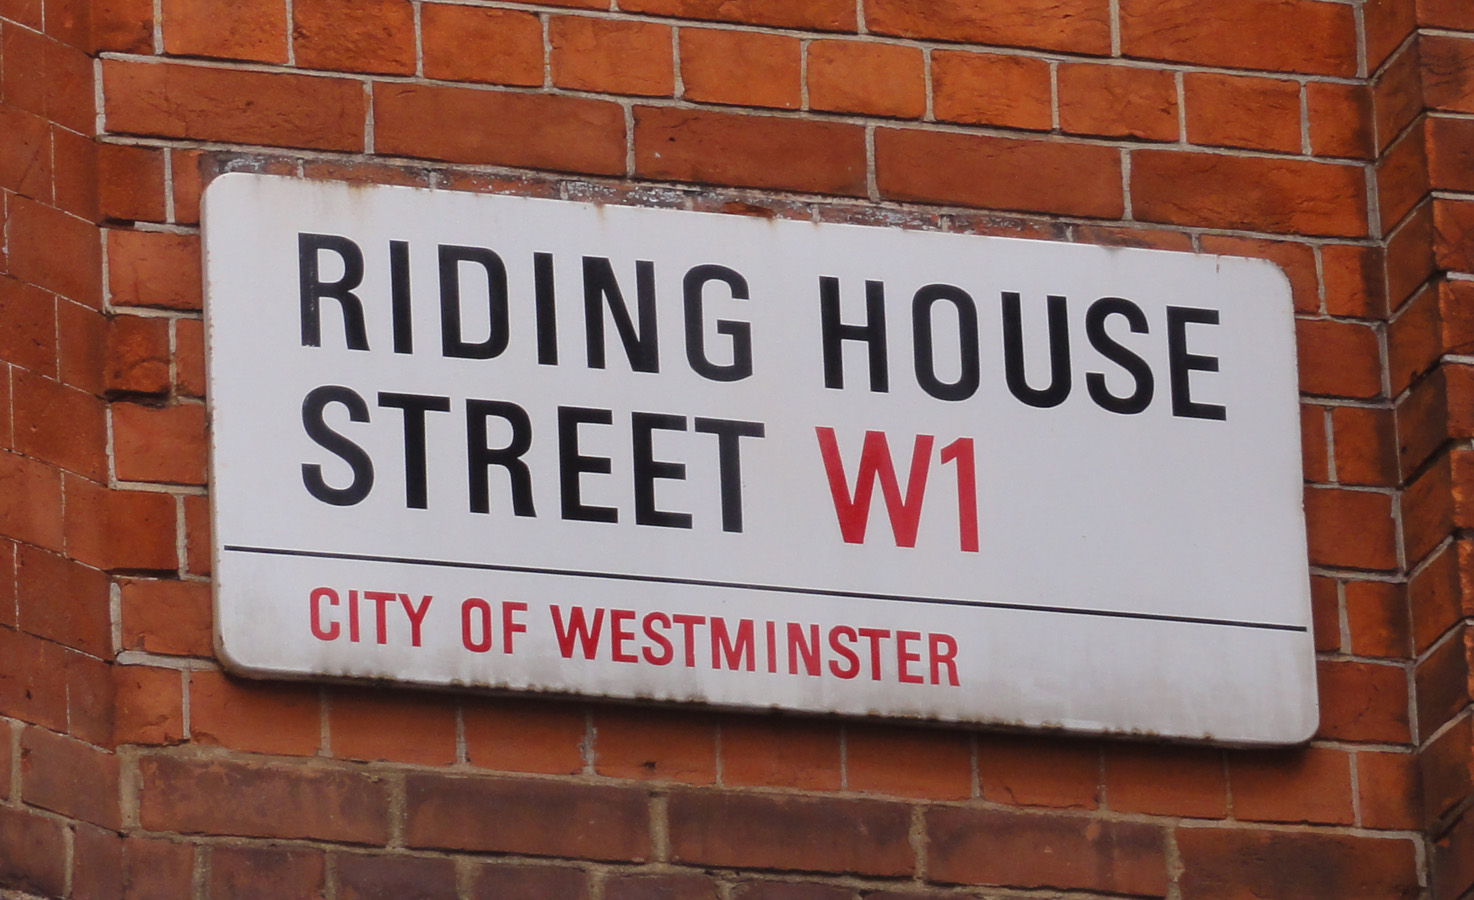 Riding House St